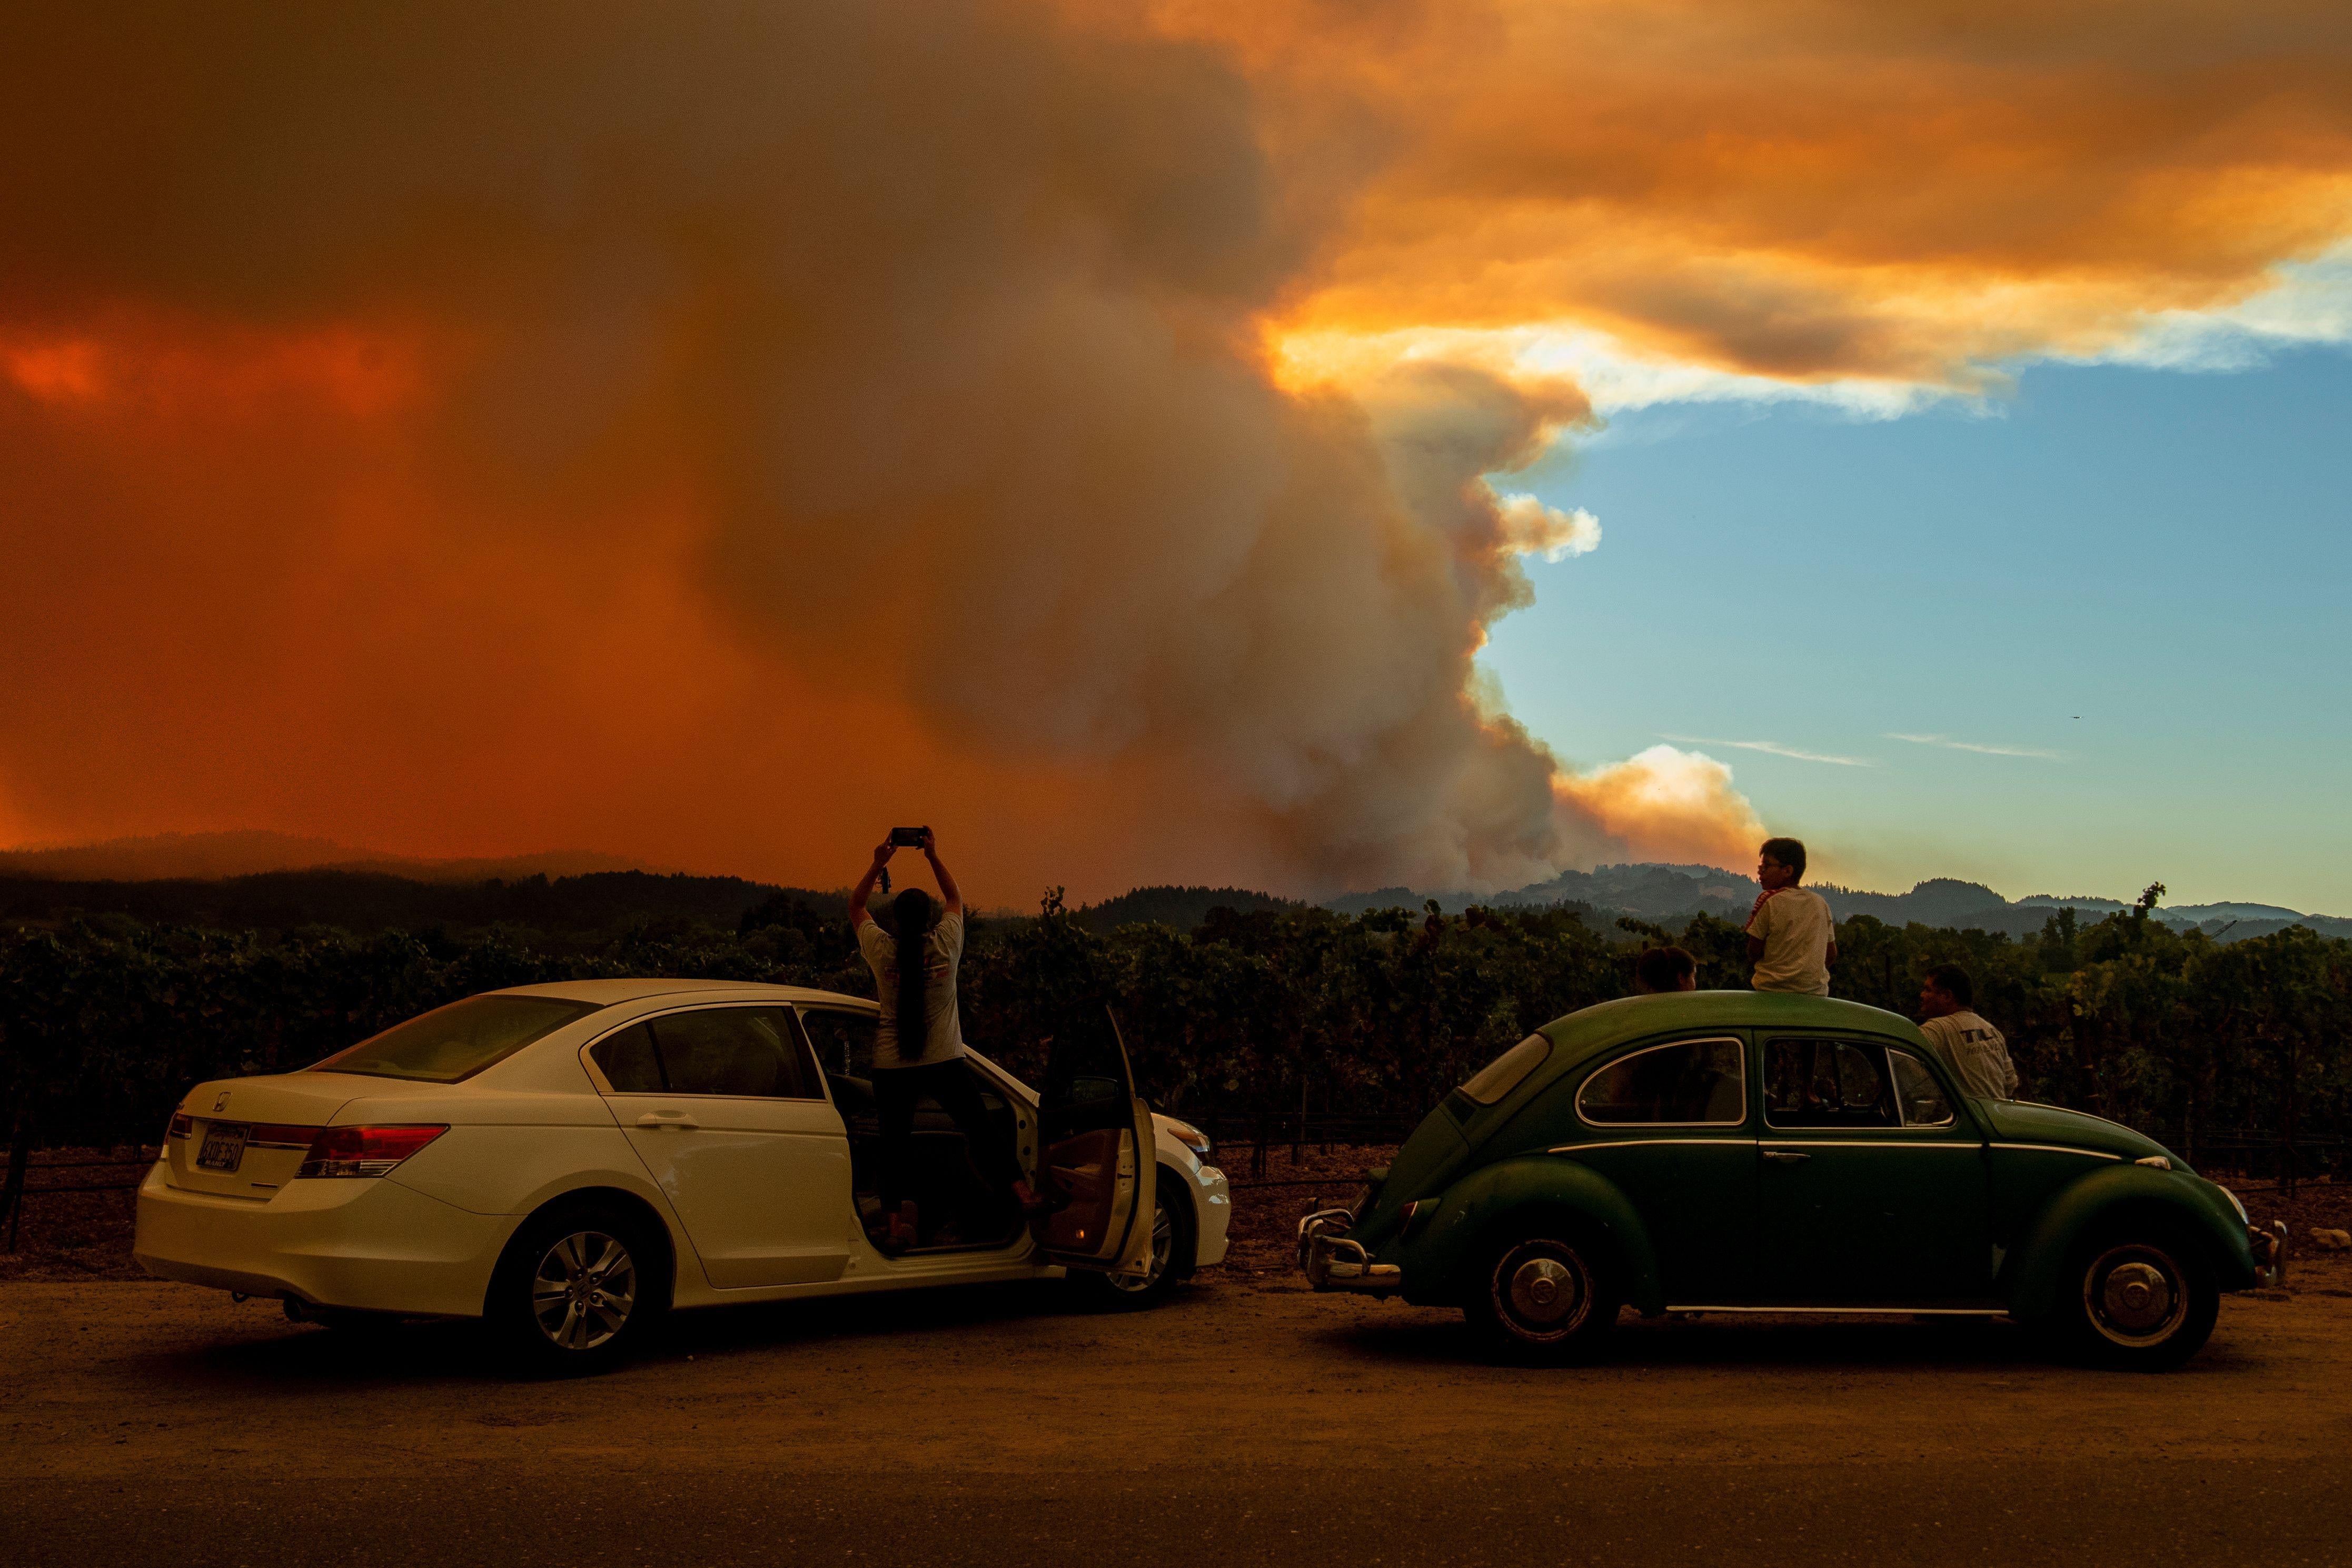 People stand outside of two cars to watch as smoke takes over the sky.